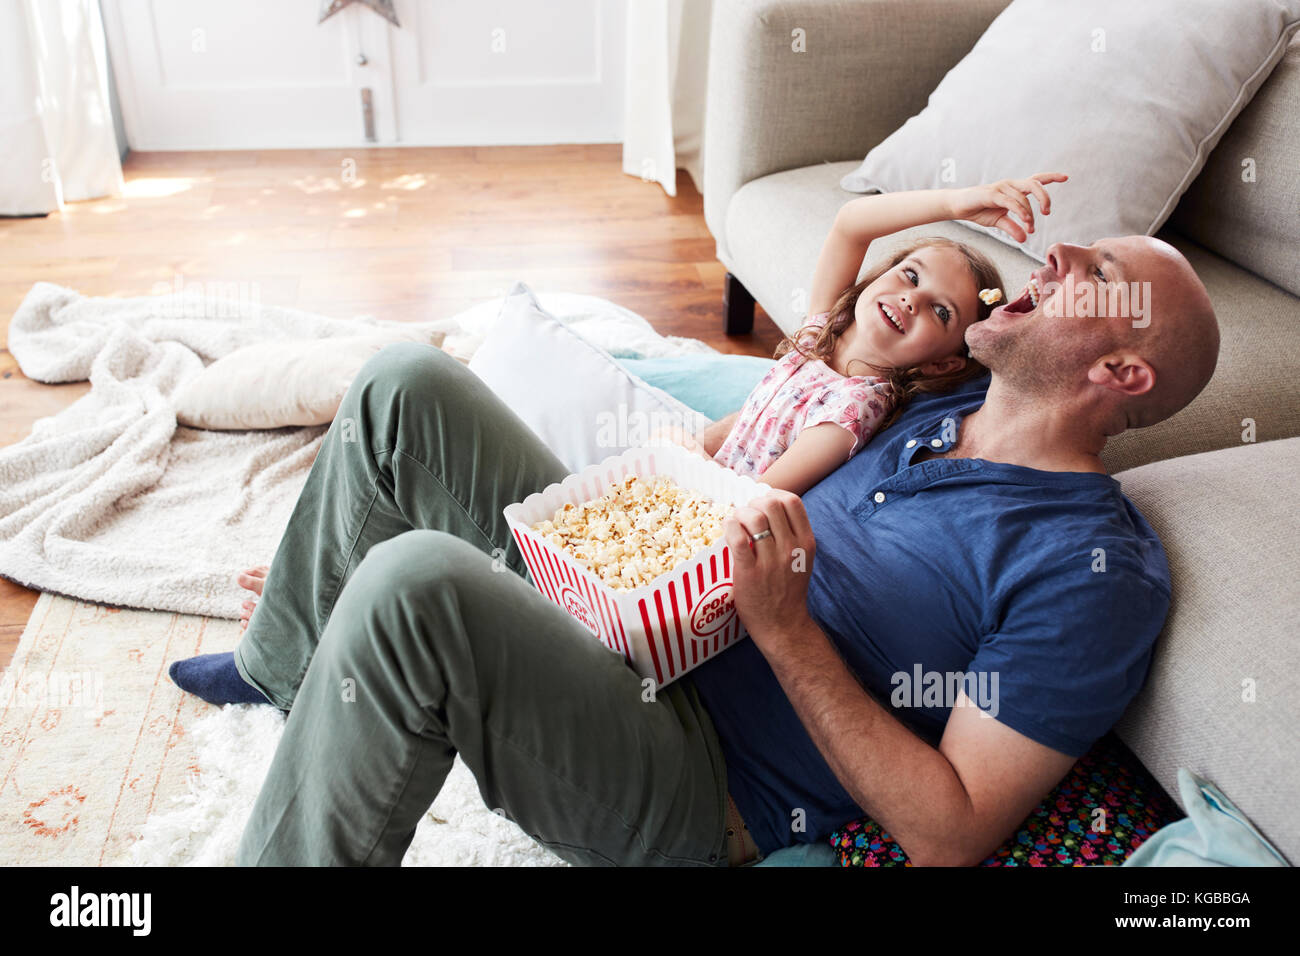 Girl feeding dad popcorn while watching TV together at home Stock Photo